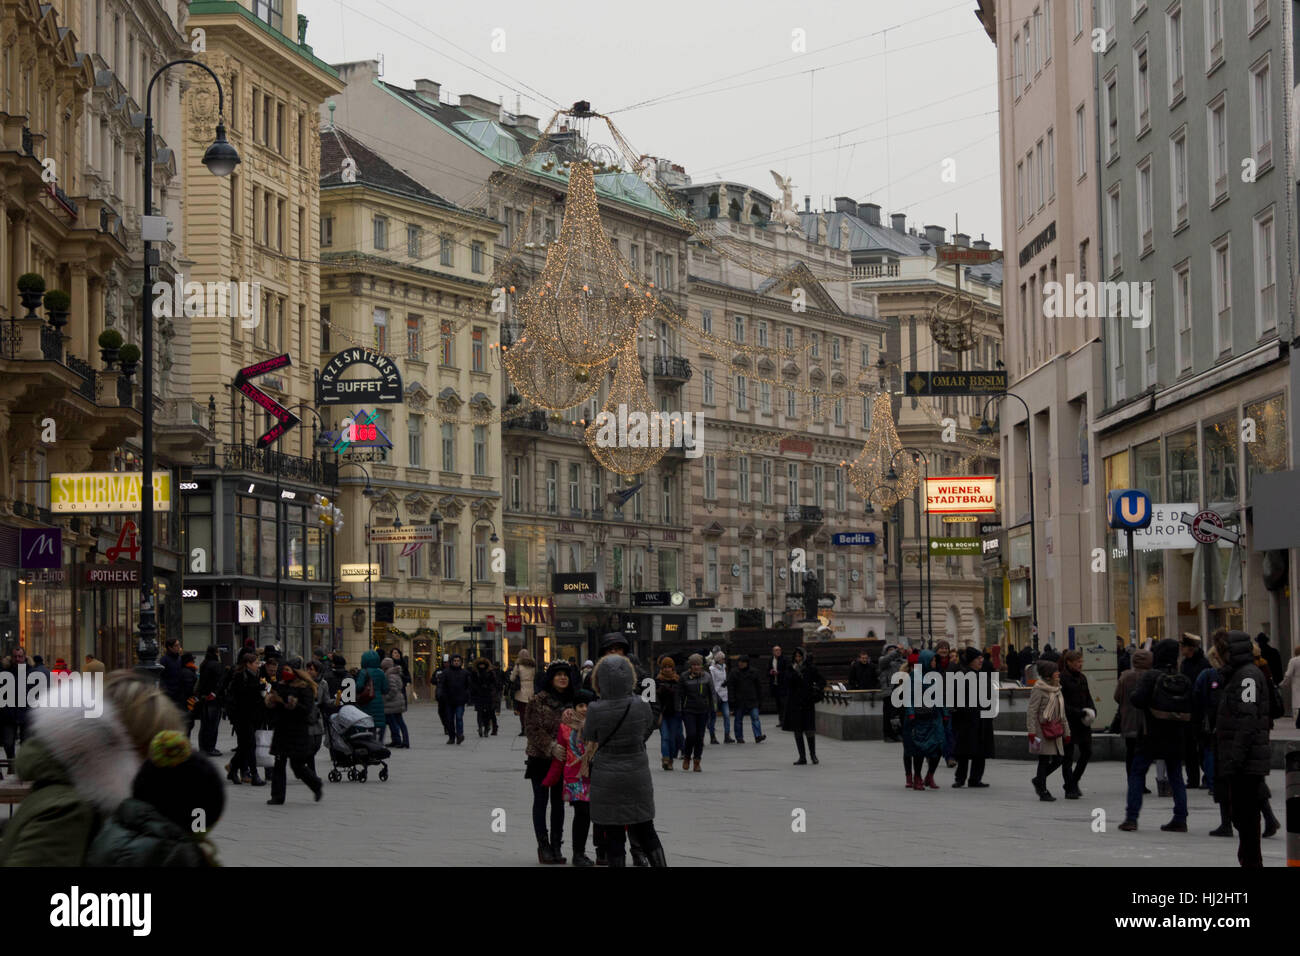 VIENNA, AUSTRIA - JANUARY 3 2016: Day view of Graben street in Vienna in the late afternoon, with the light decoration on and people around Stock Photo